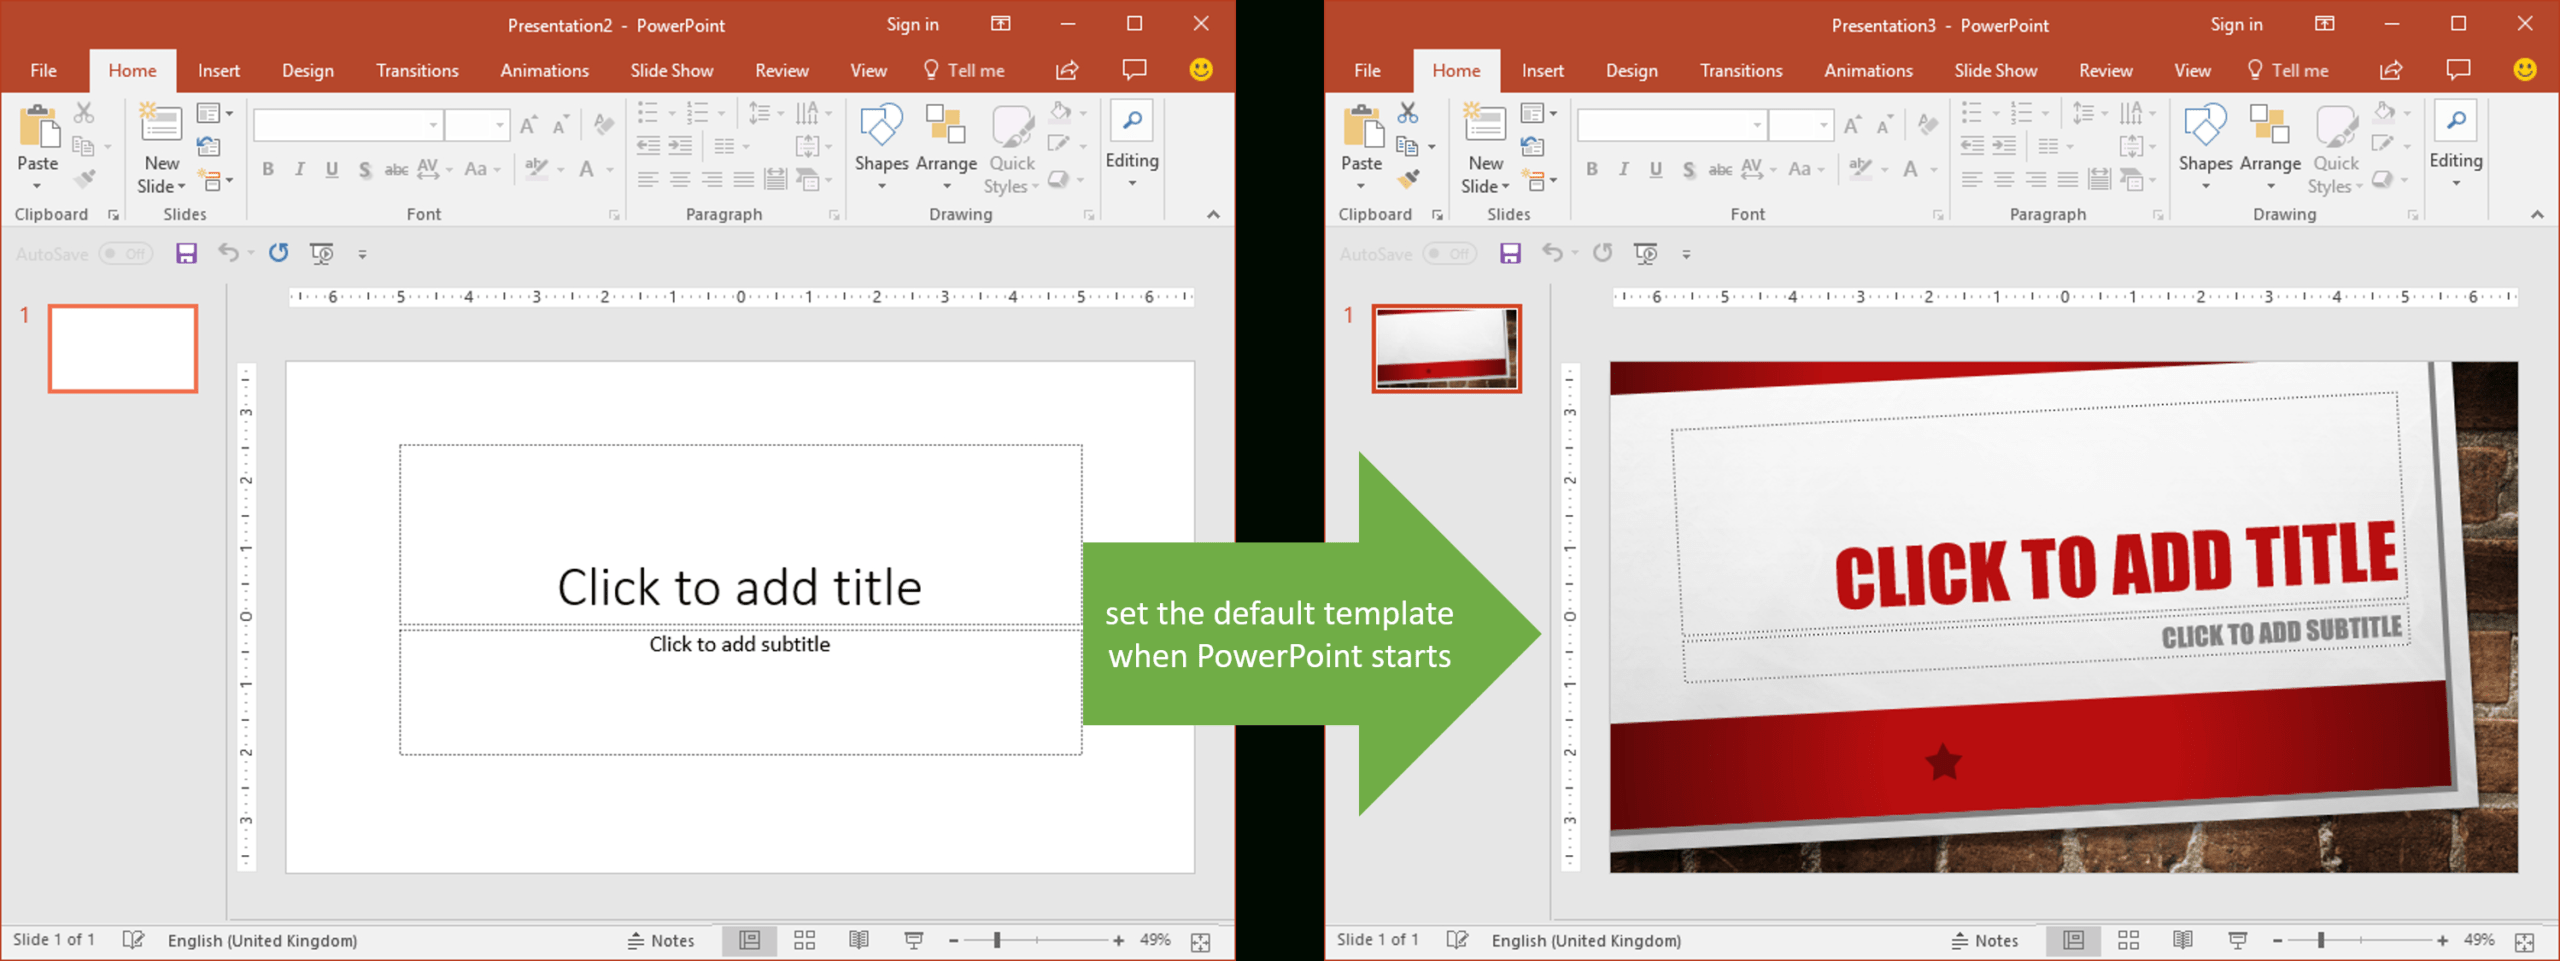 Set The Default Template When Powerpoint Starts | Youpresent Intended For Where Are Powerpoint Templates Stored